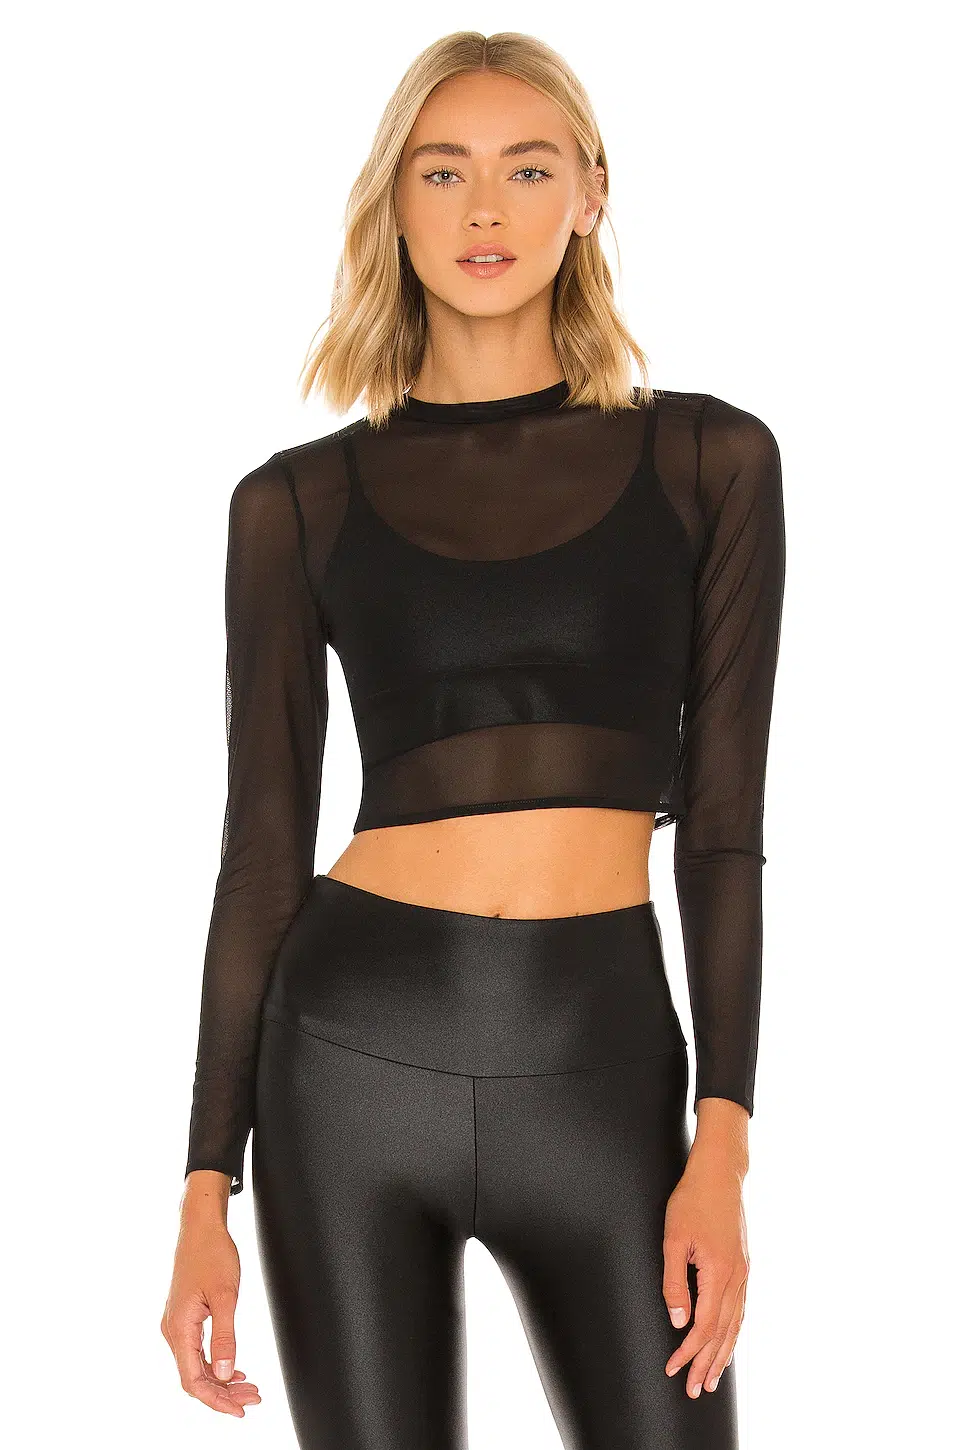 The 10 Best Mesh Tops to Shop Right Now